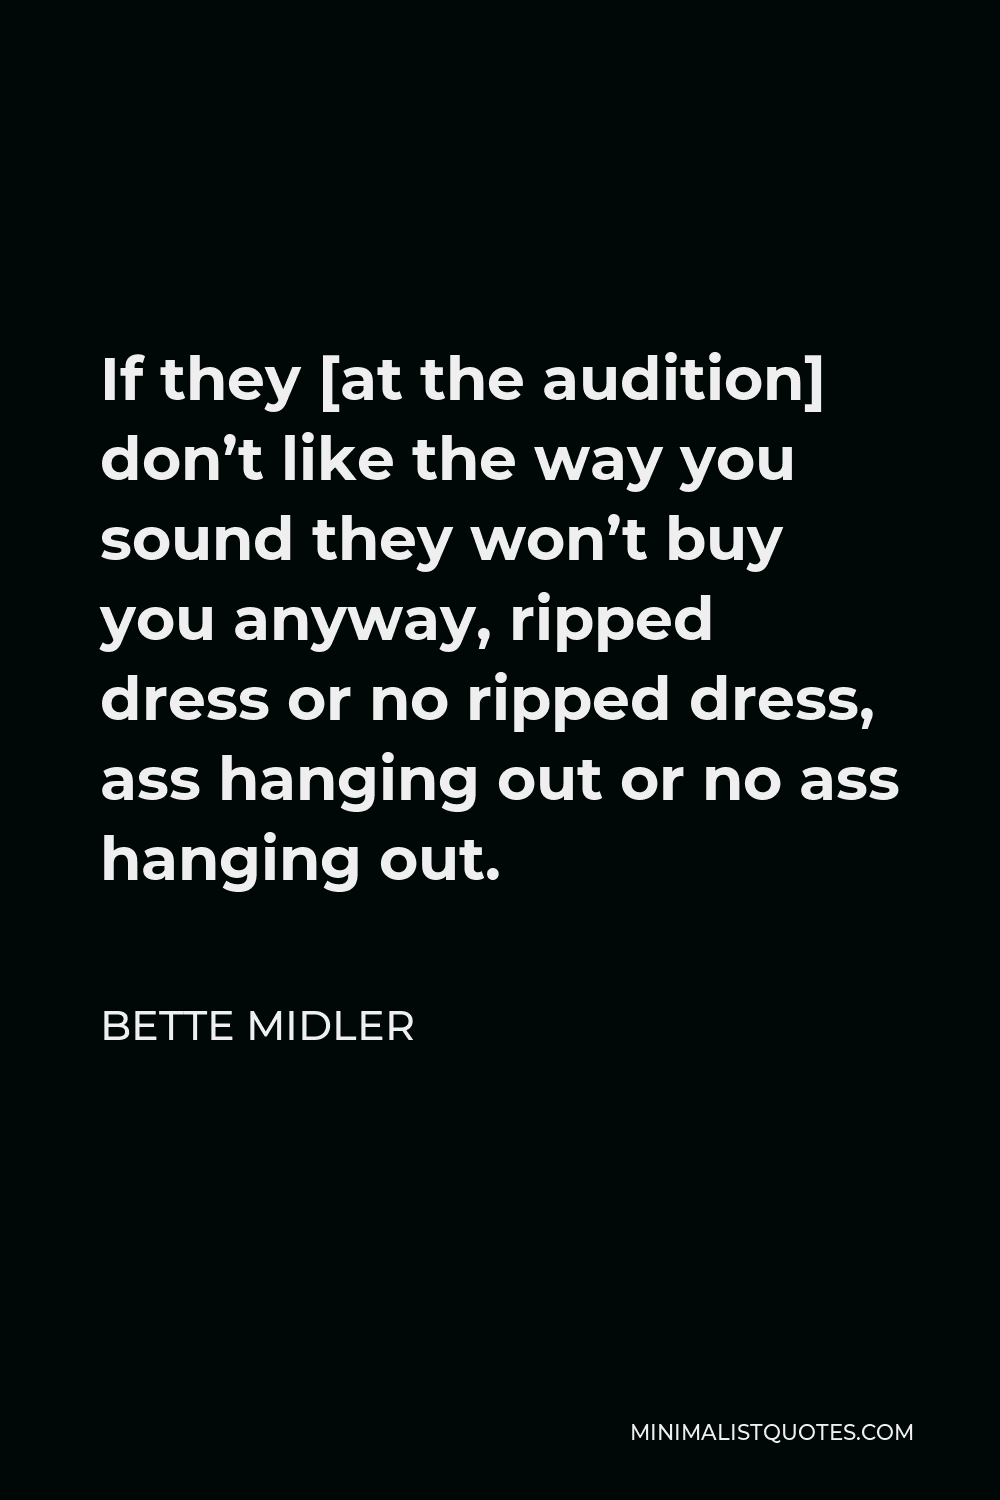 Bette Midler Quote - If they [at the audition] don’t like the way you sound they won’t buy you anyway, ripped dress or no ripped dress, ass hanging out or no ass hanging out.